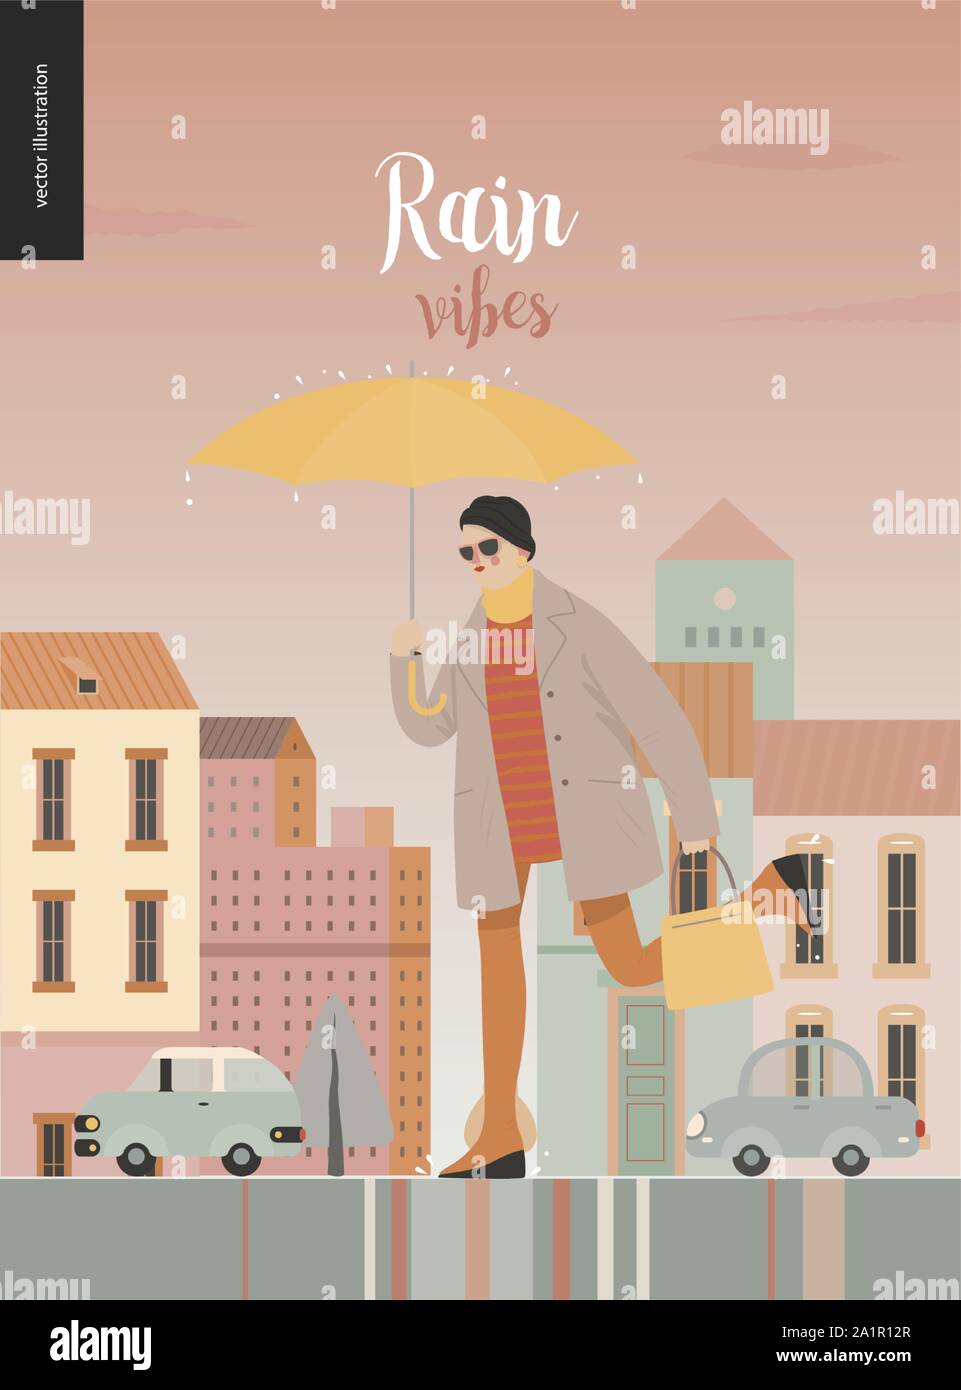 Rain -running person -modern flat vector concept illustration of an adult woman or man wearing turban and sunglasses, with umbrella, running in the ra Stock Vector